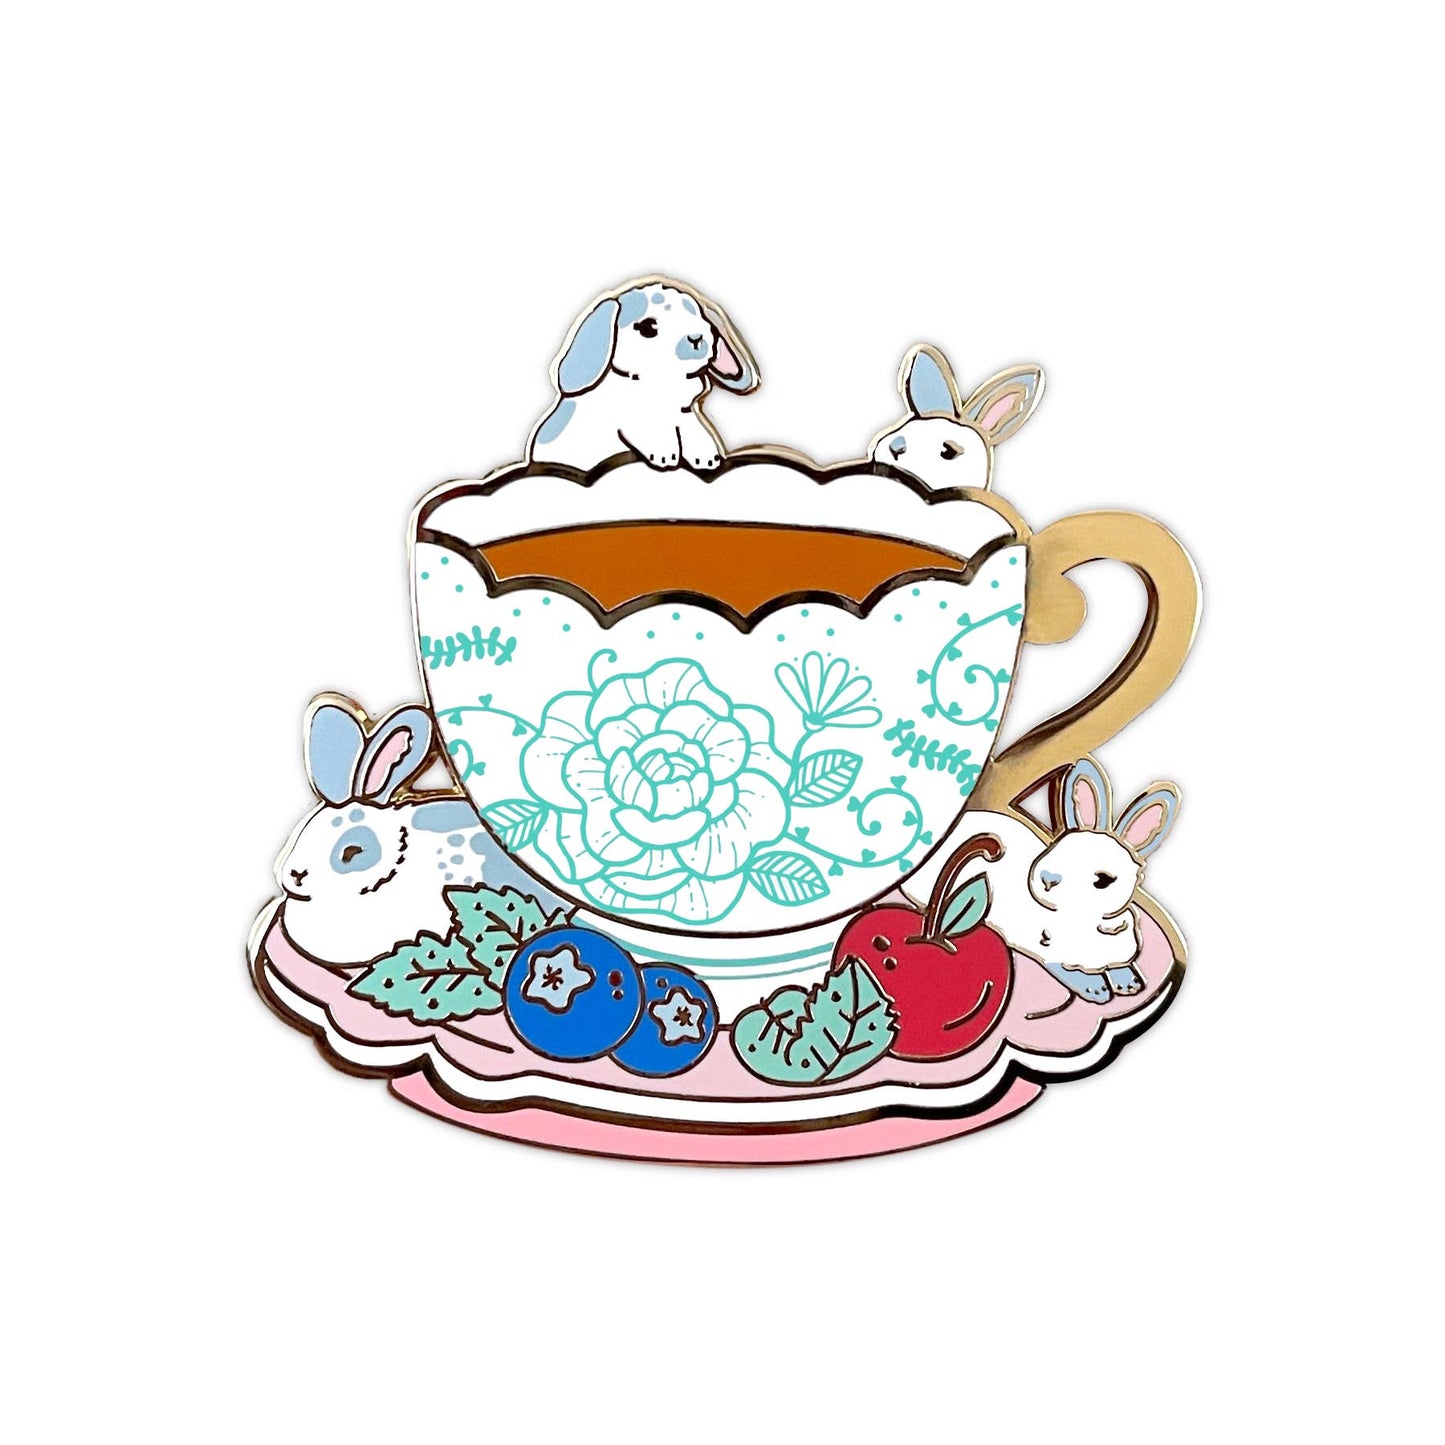 Tea Cup Rabbit Enamel Pin - expected mid August - reserve now!